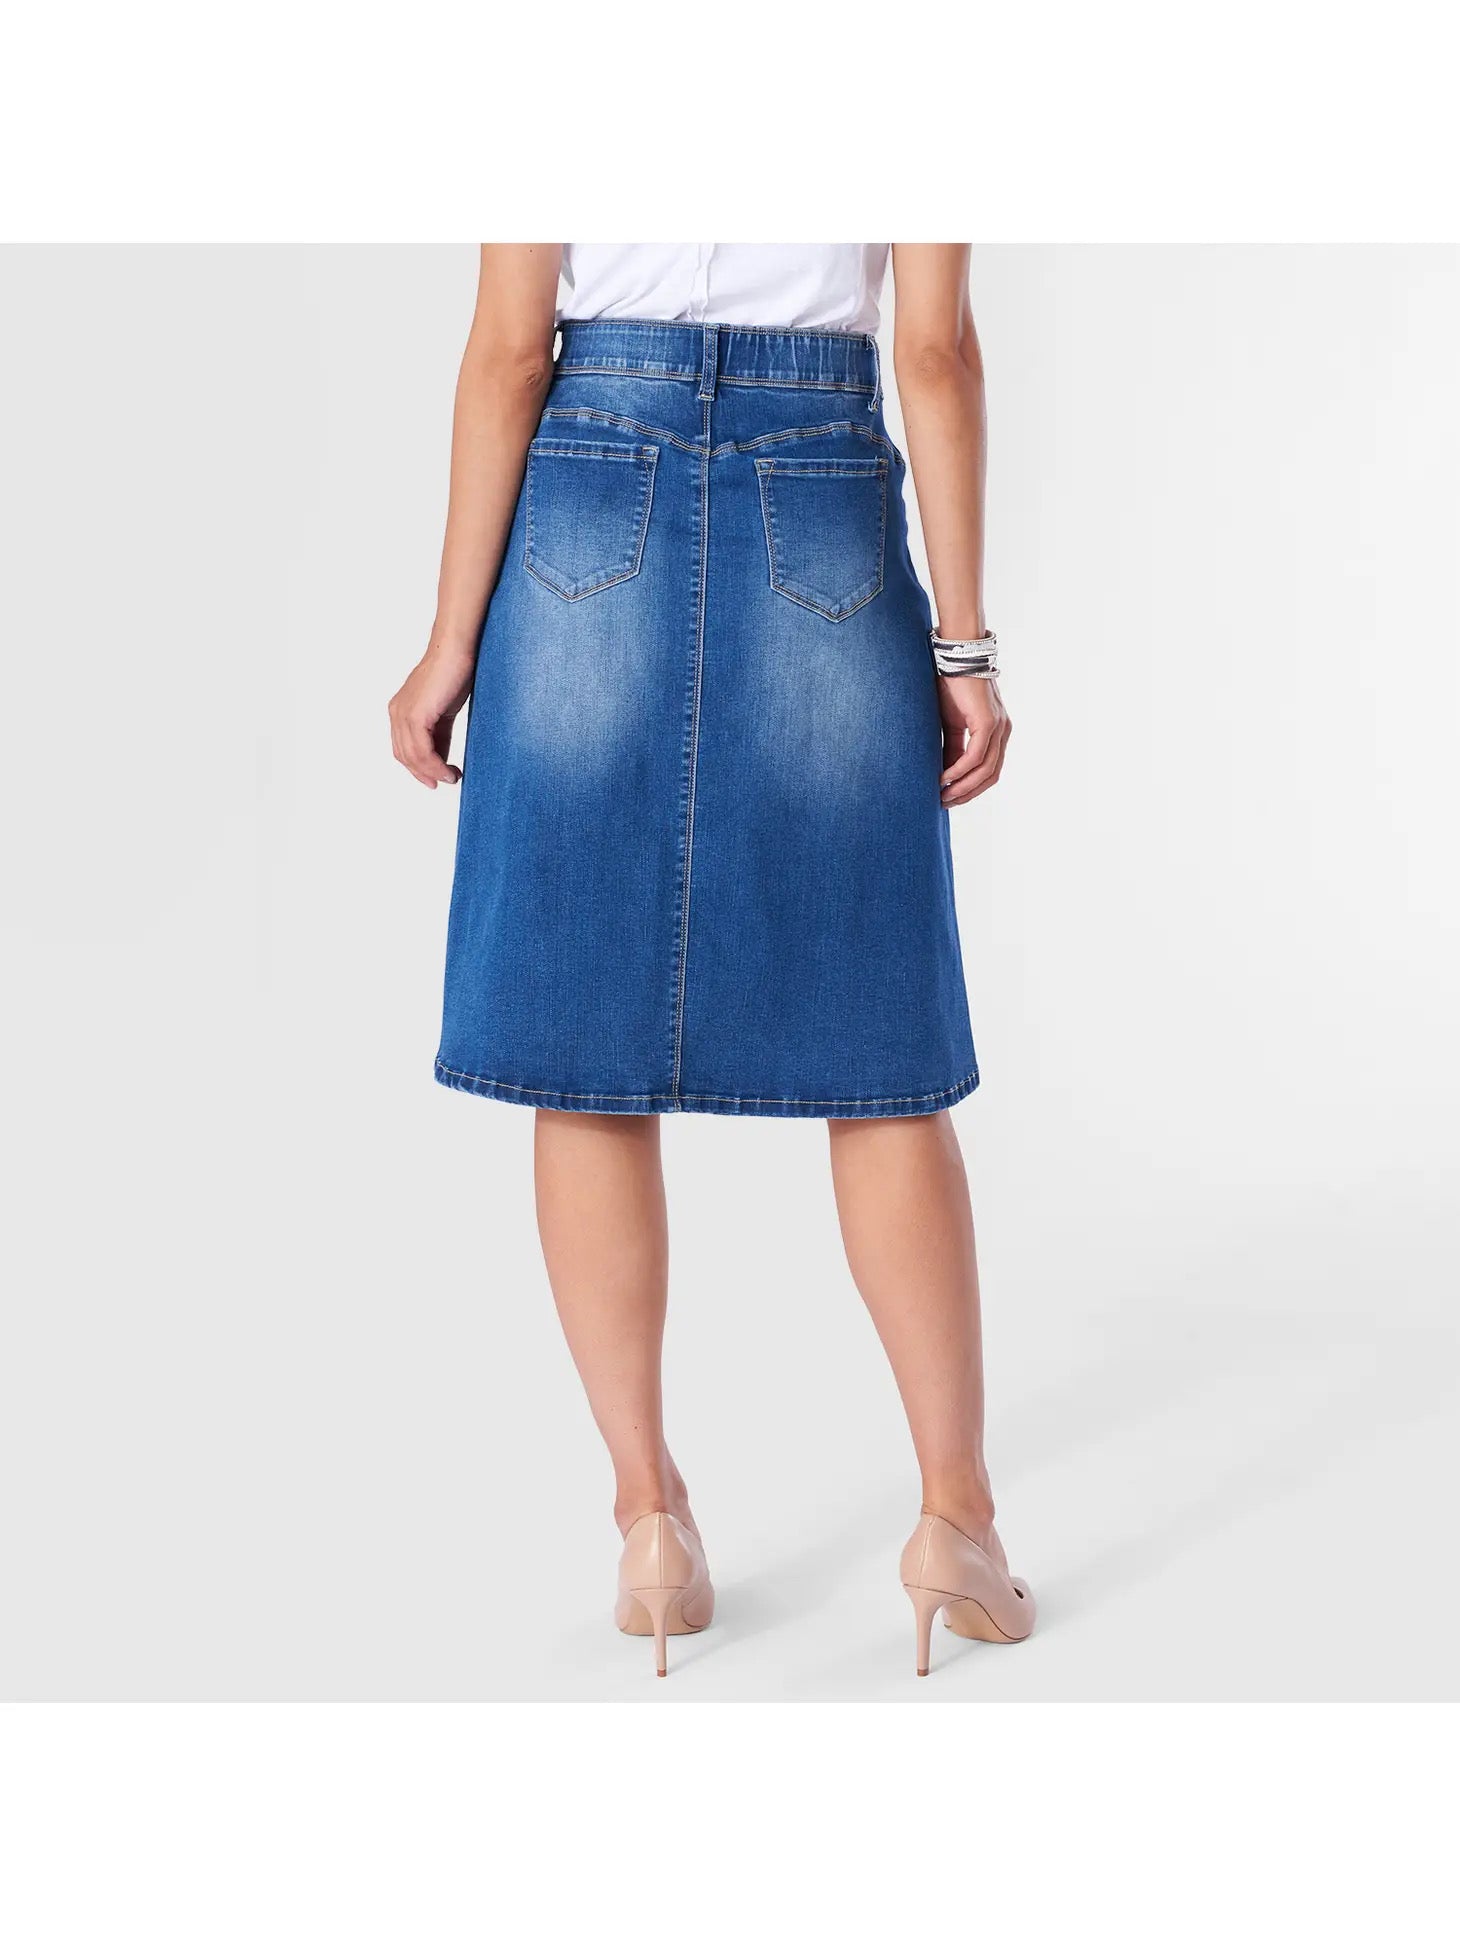 Denim Skirt High Waist Zip Front Open Fork Hem Fashion Denim Factory Jeans  - China Denim Jeans and Jeans price | Made-in-China.com